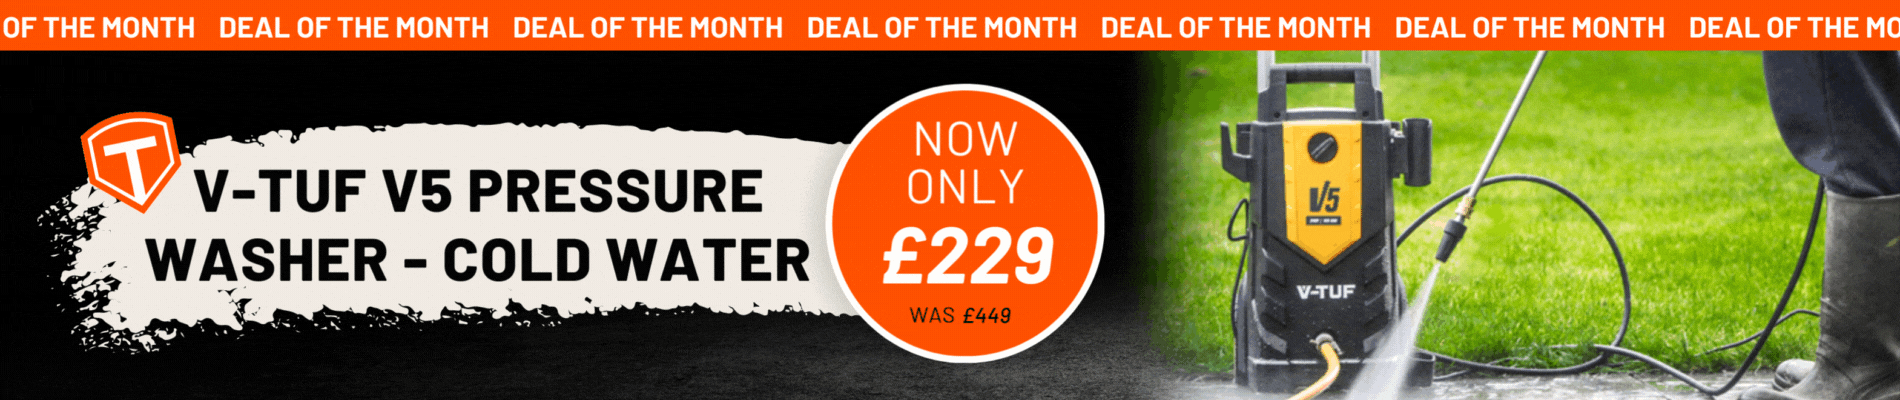 May Deal of the Month - Web Banner (1900x400)